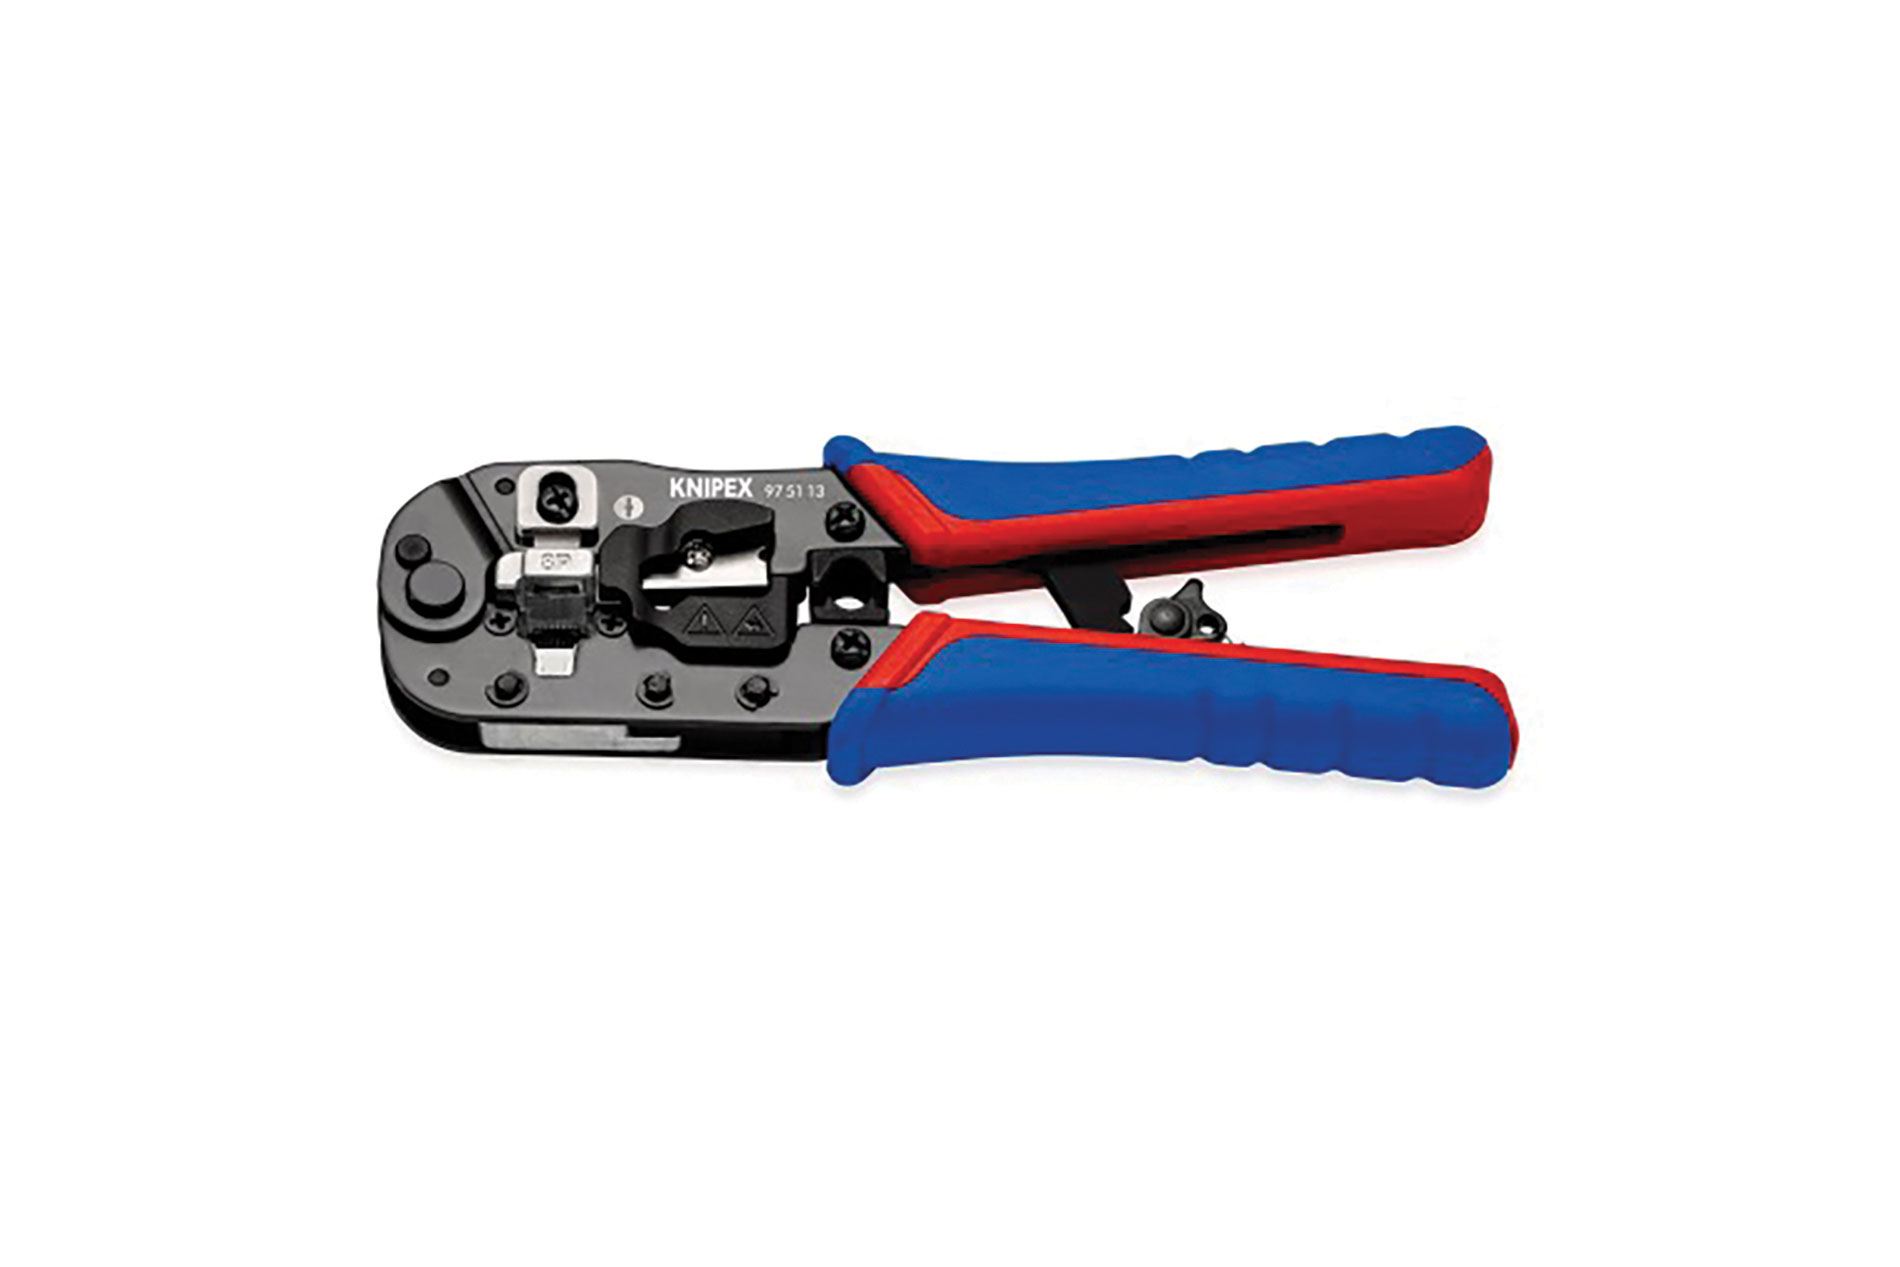 Blue and red crimping pliers. Image by Knipex.